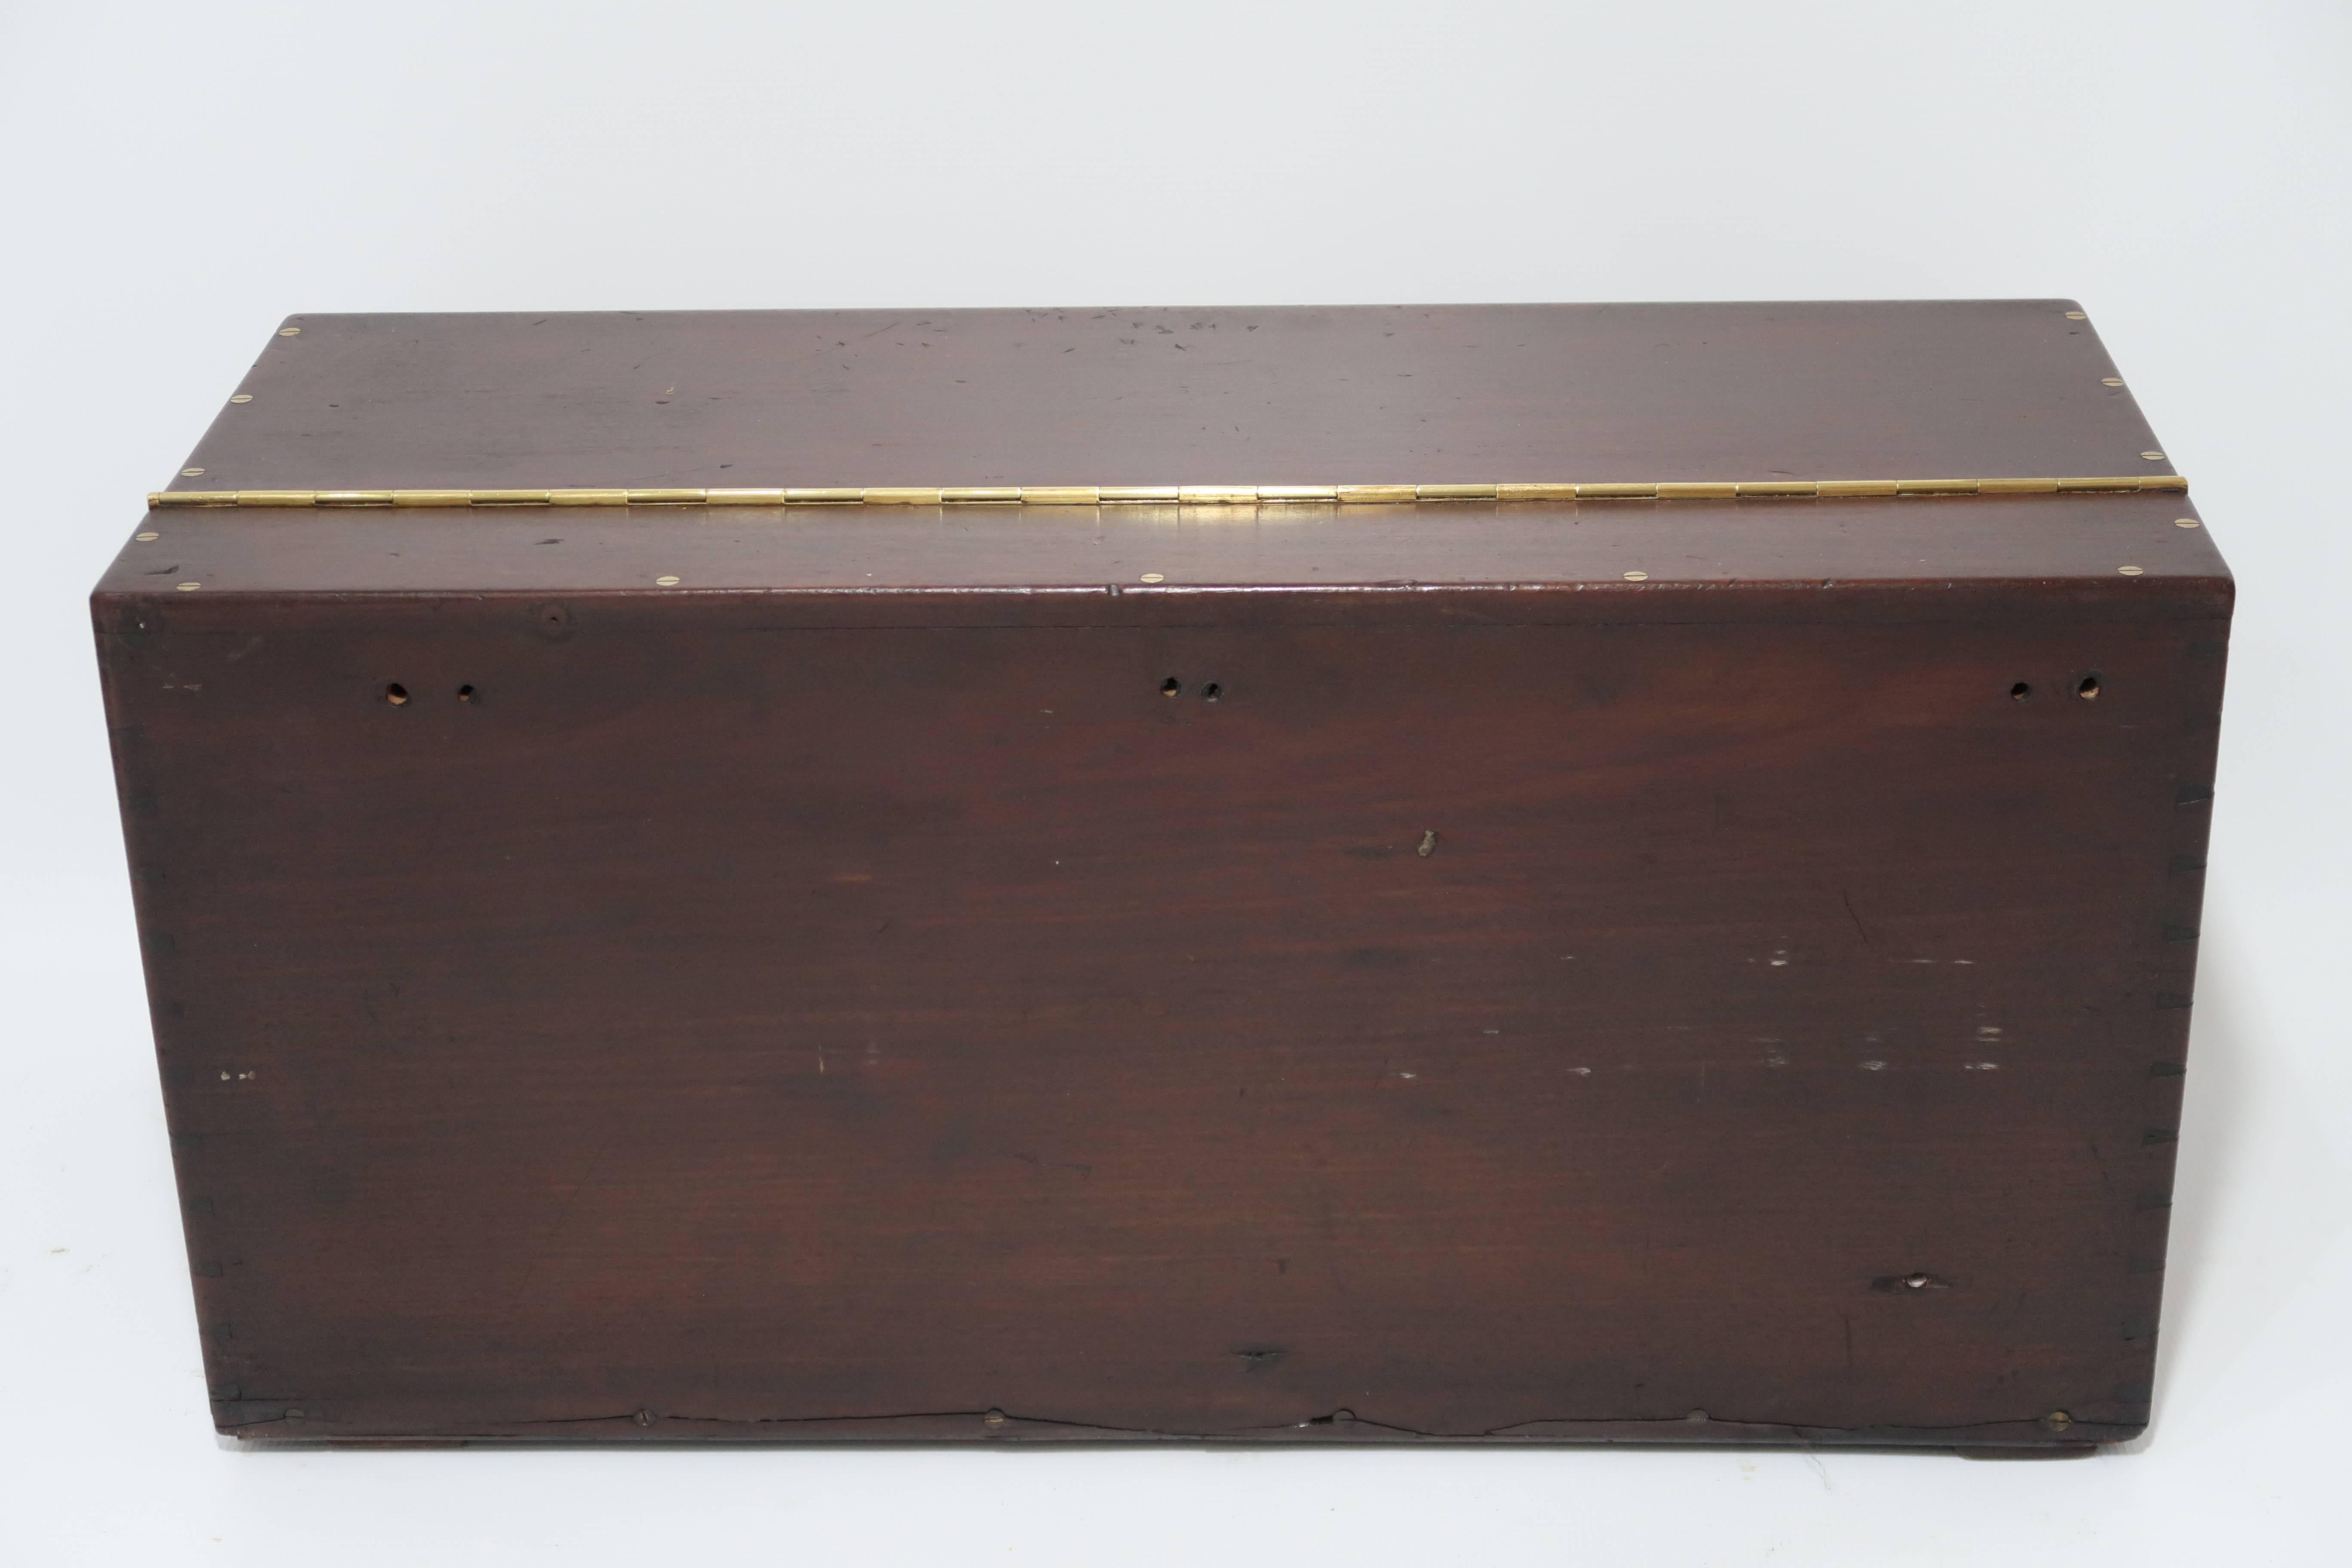 French 1890s Louis Vuitton Wooden Tool Box Trunk, 1 of the 100 Legendary Trunks For Sale